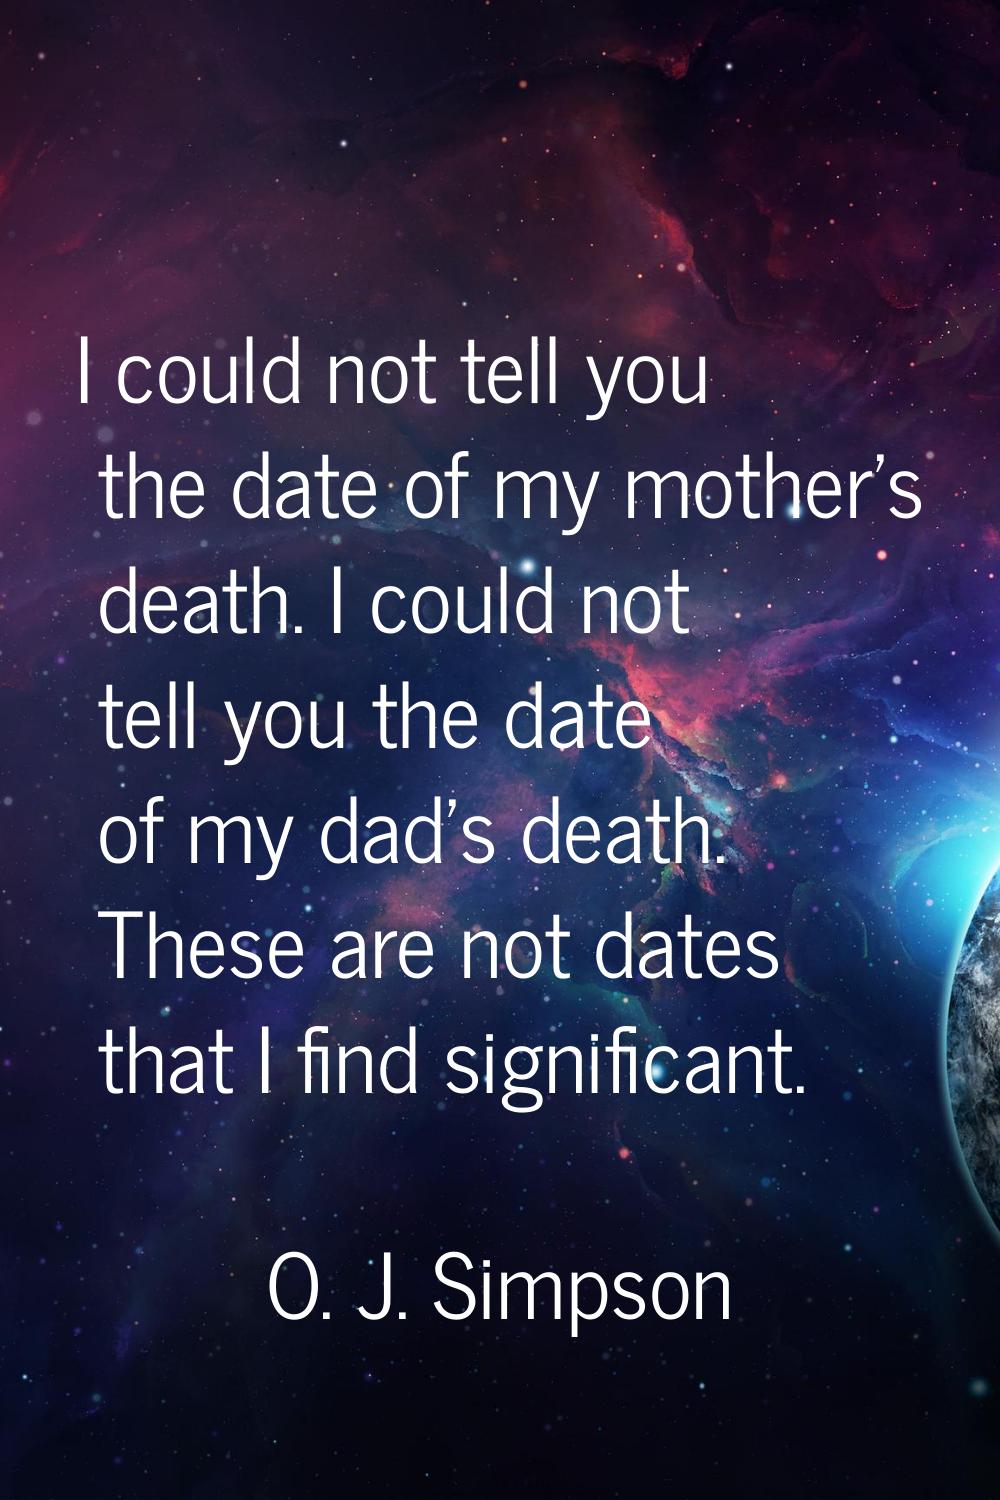 I could not tell you the date of my mother's death. I could not tell you the date of my dad's death